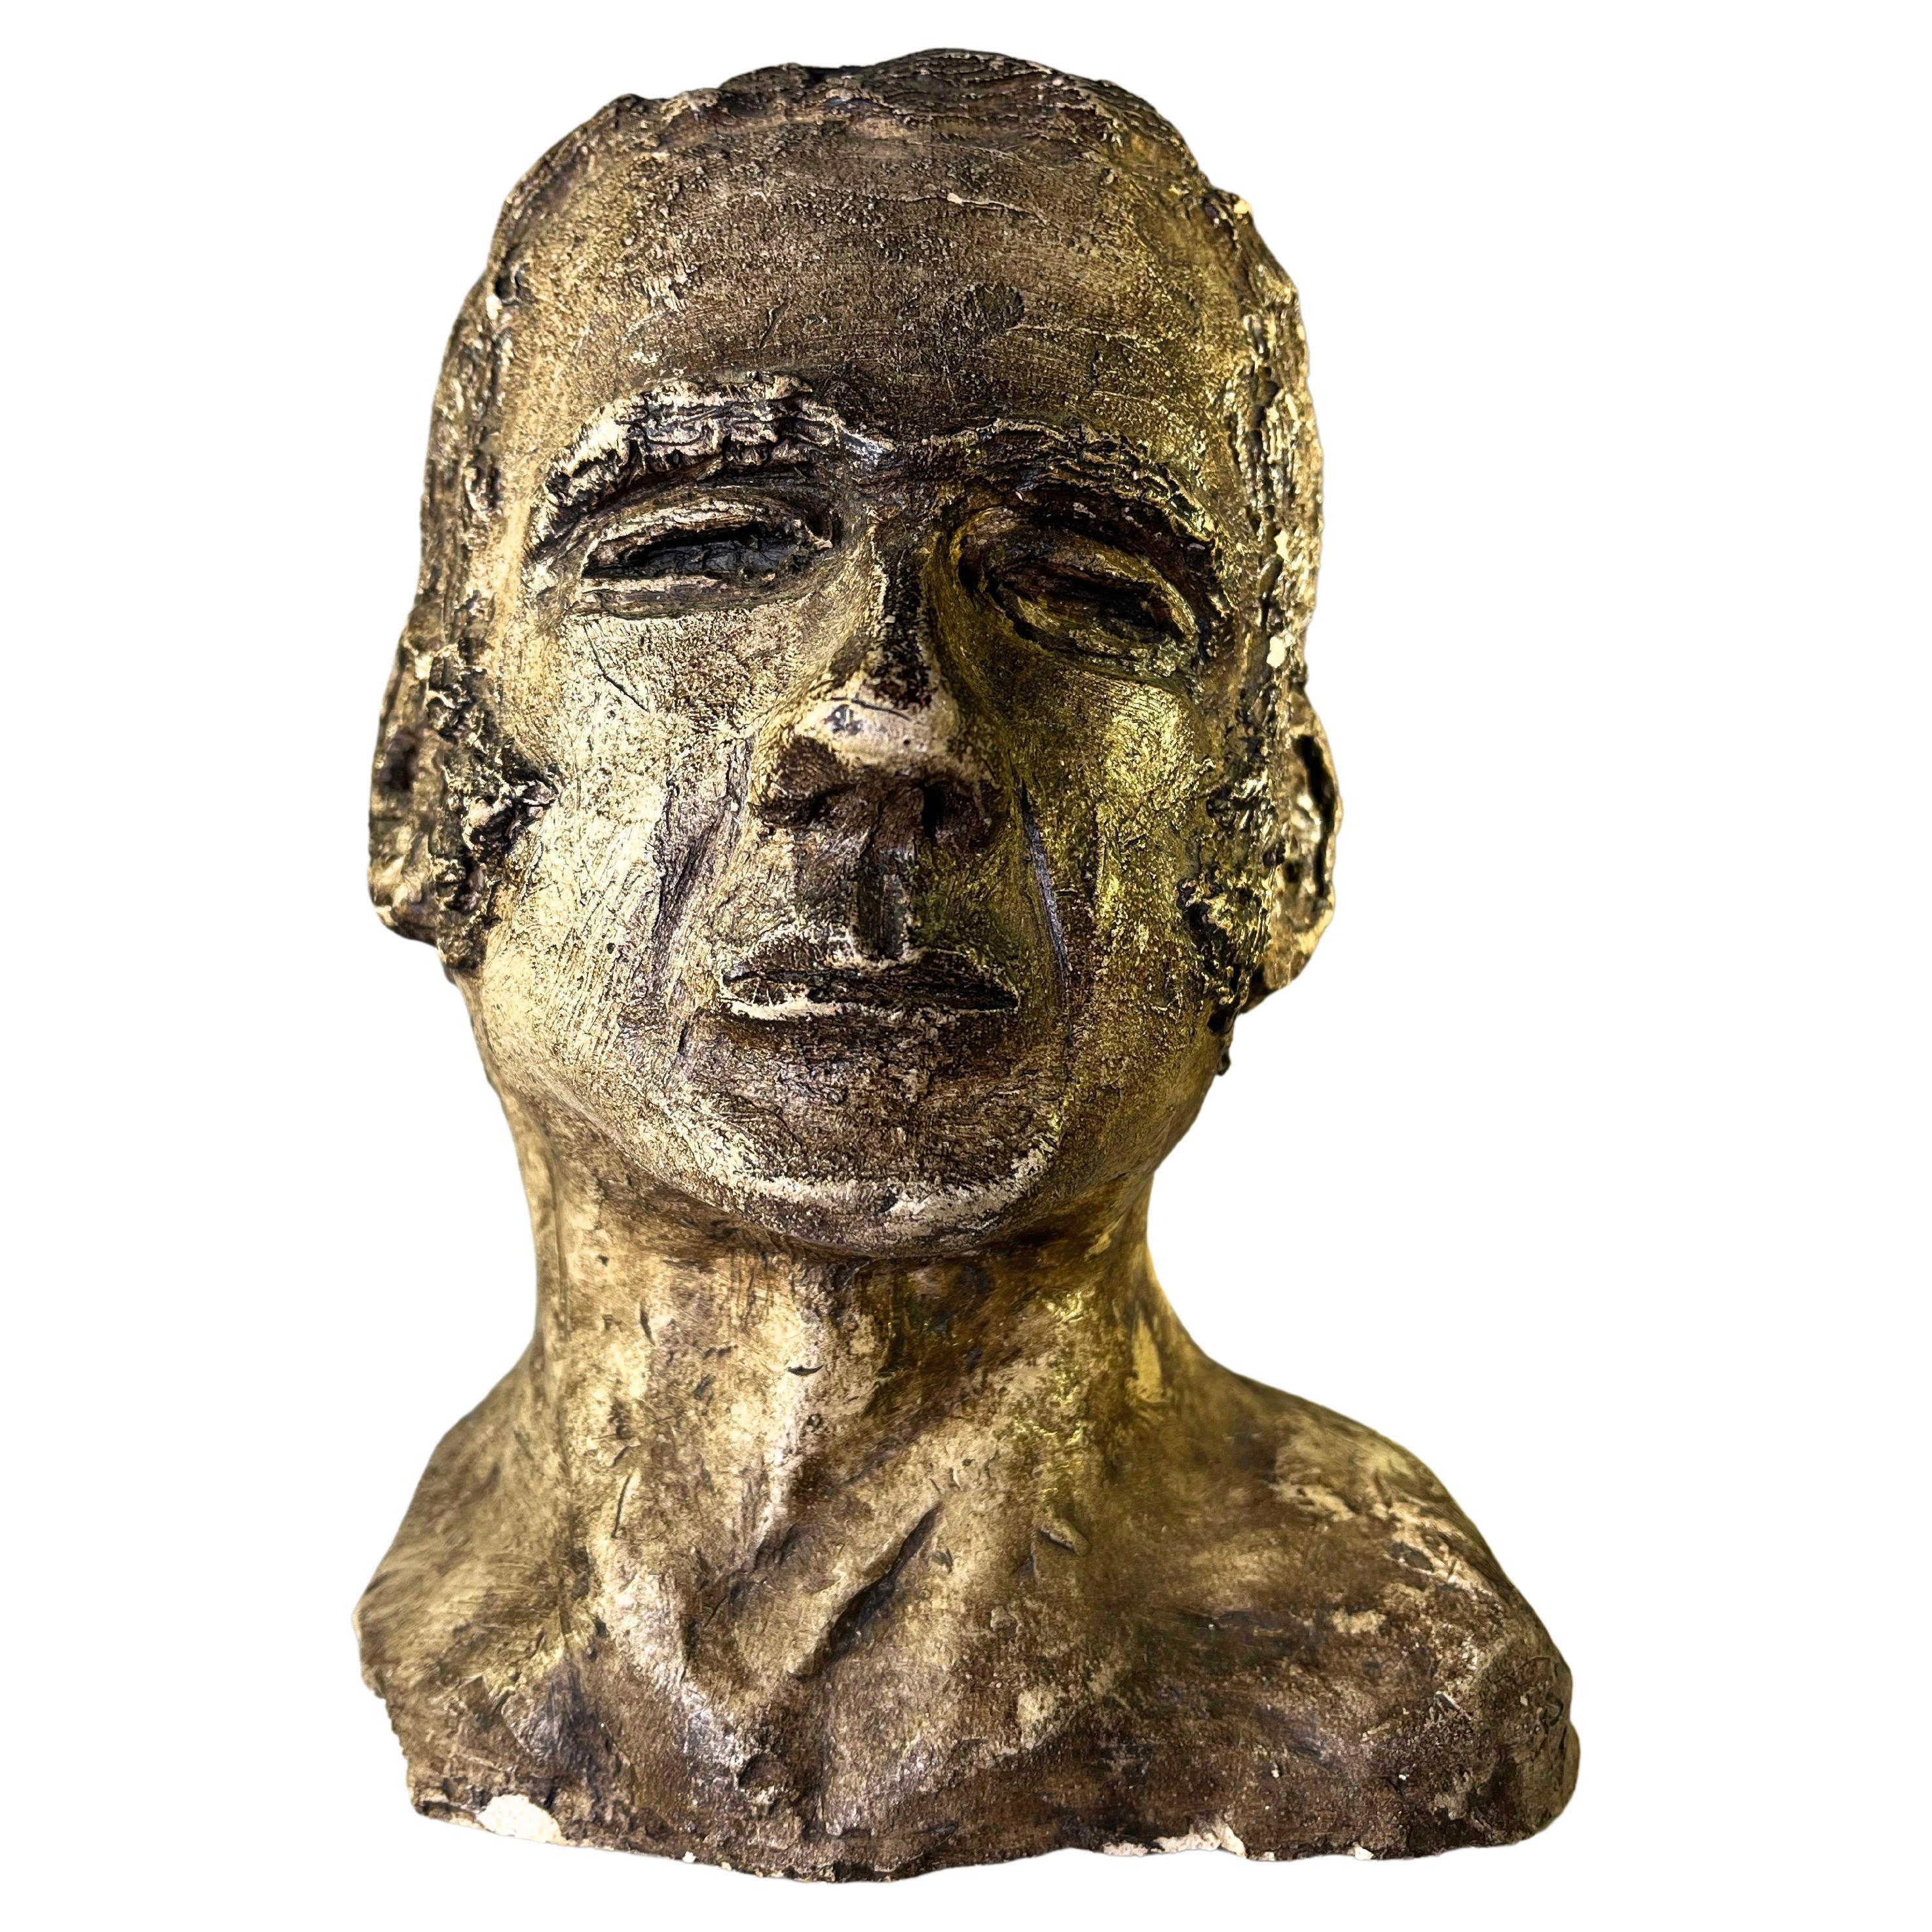 Strikingly Powerful, Vintage Clay Sculpture Bust Of A South American Macho Male